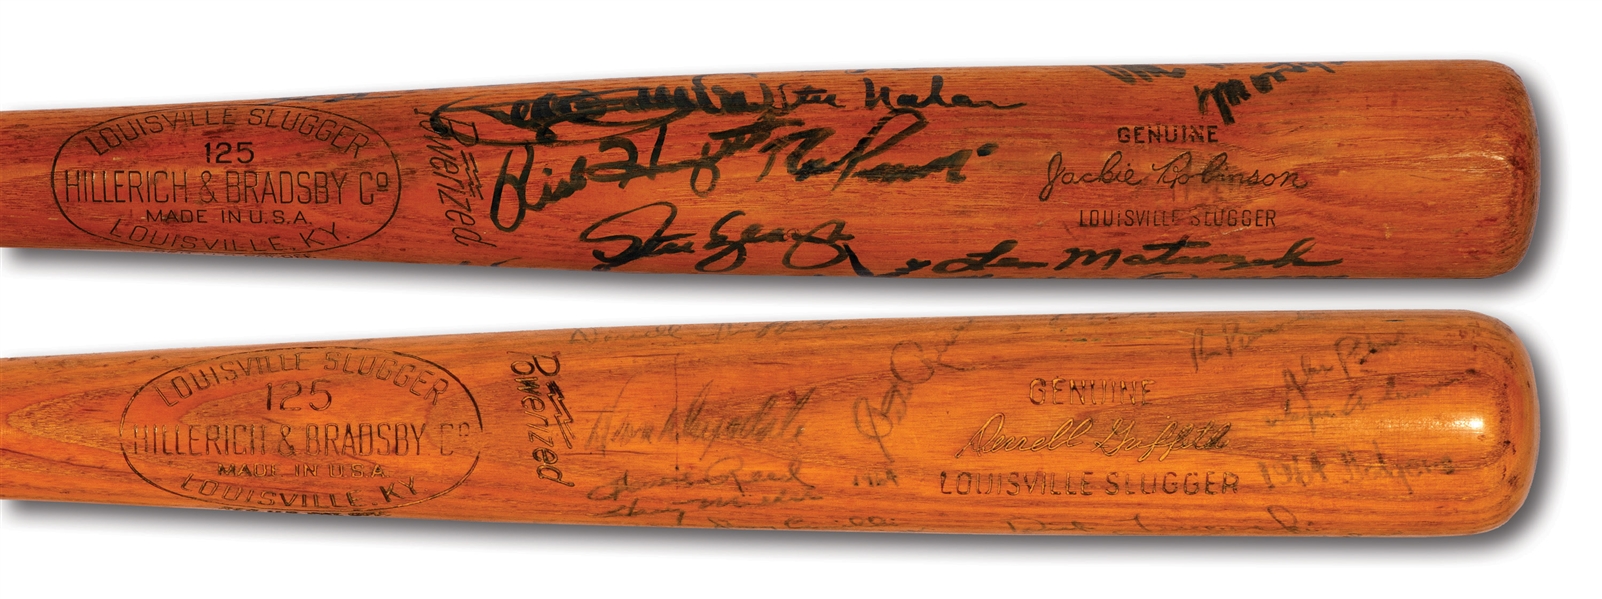 PAIR OF L.A. DODGERS TEAM SIGNED BATS: 1964 DERRELL GRIFFITH GAME USED H&B PRO MODEL AND 1980S JACKIE ROBINSON H&B STORE MODEL